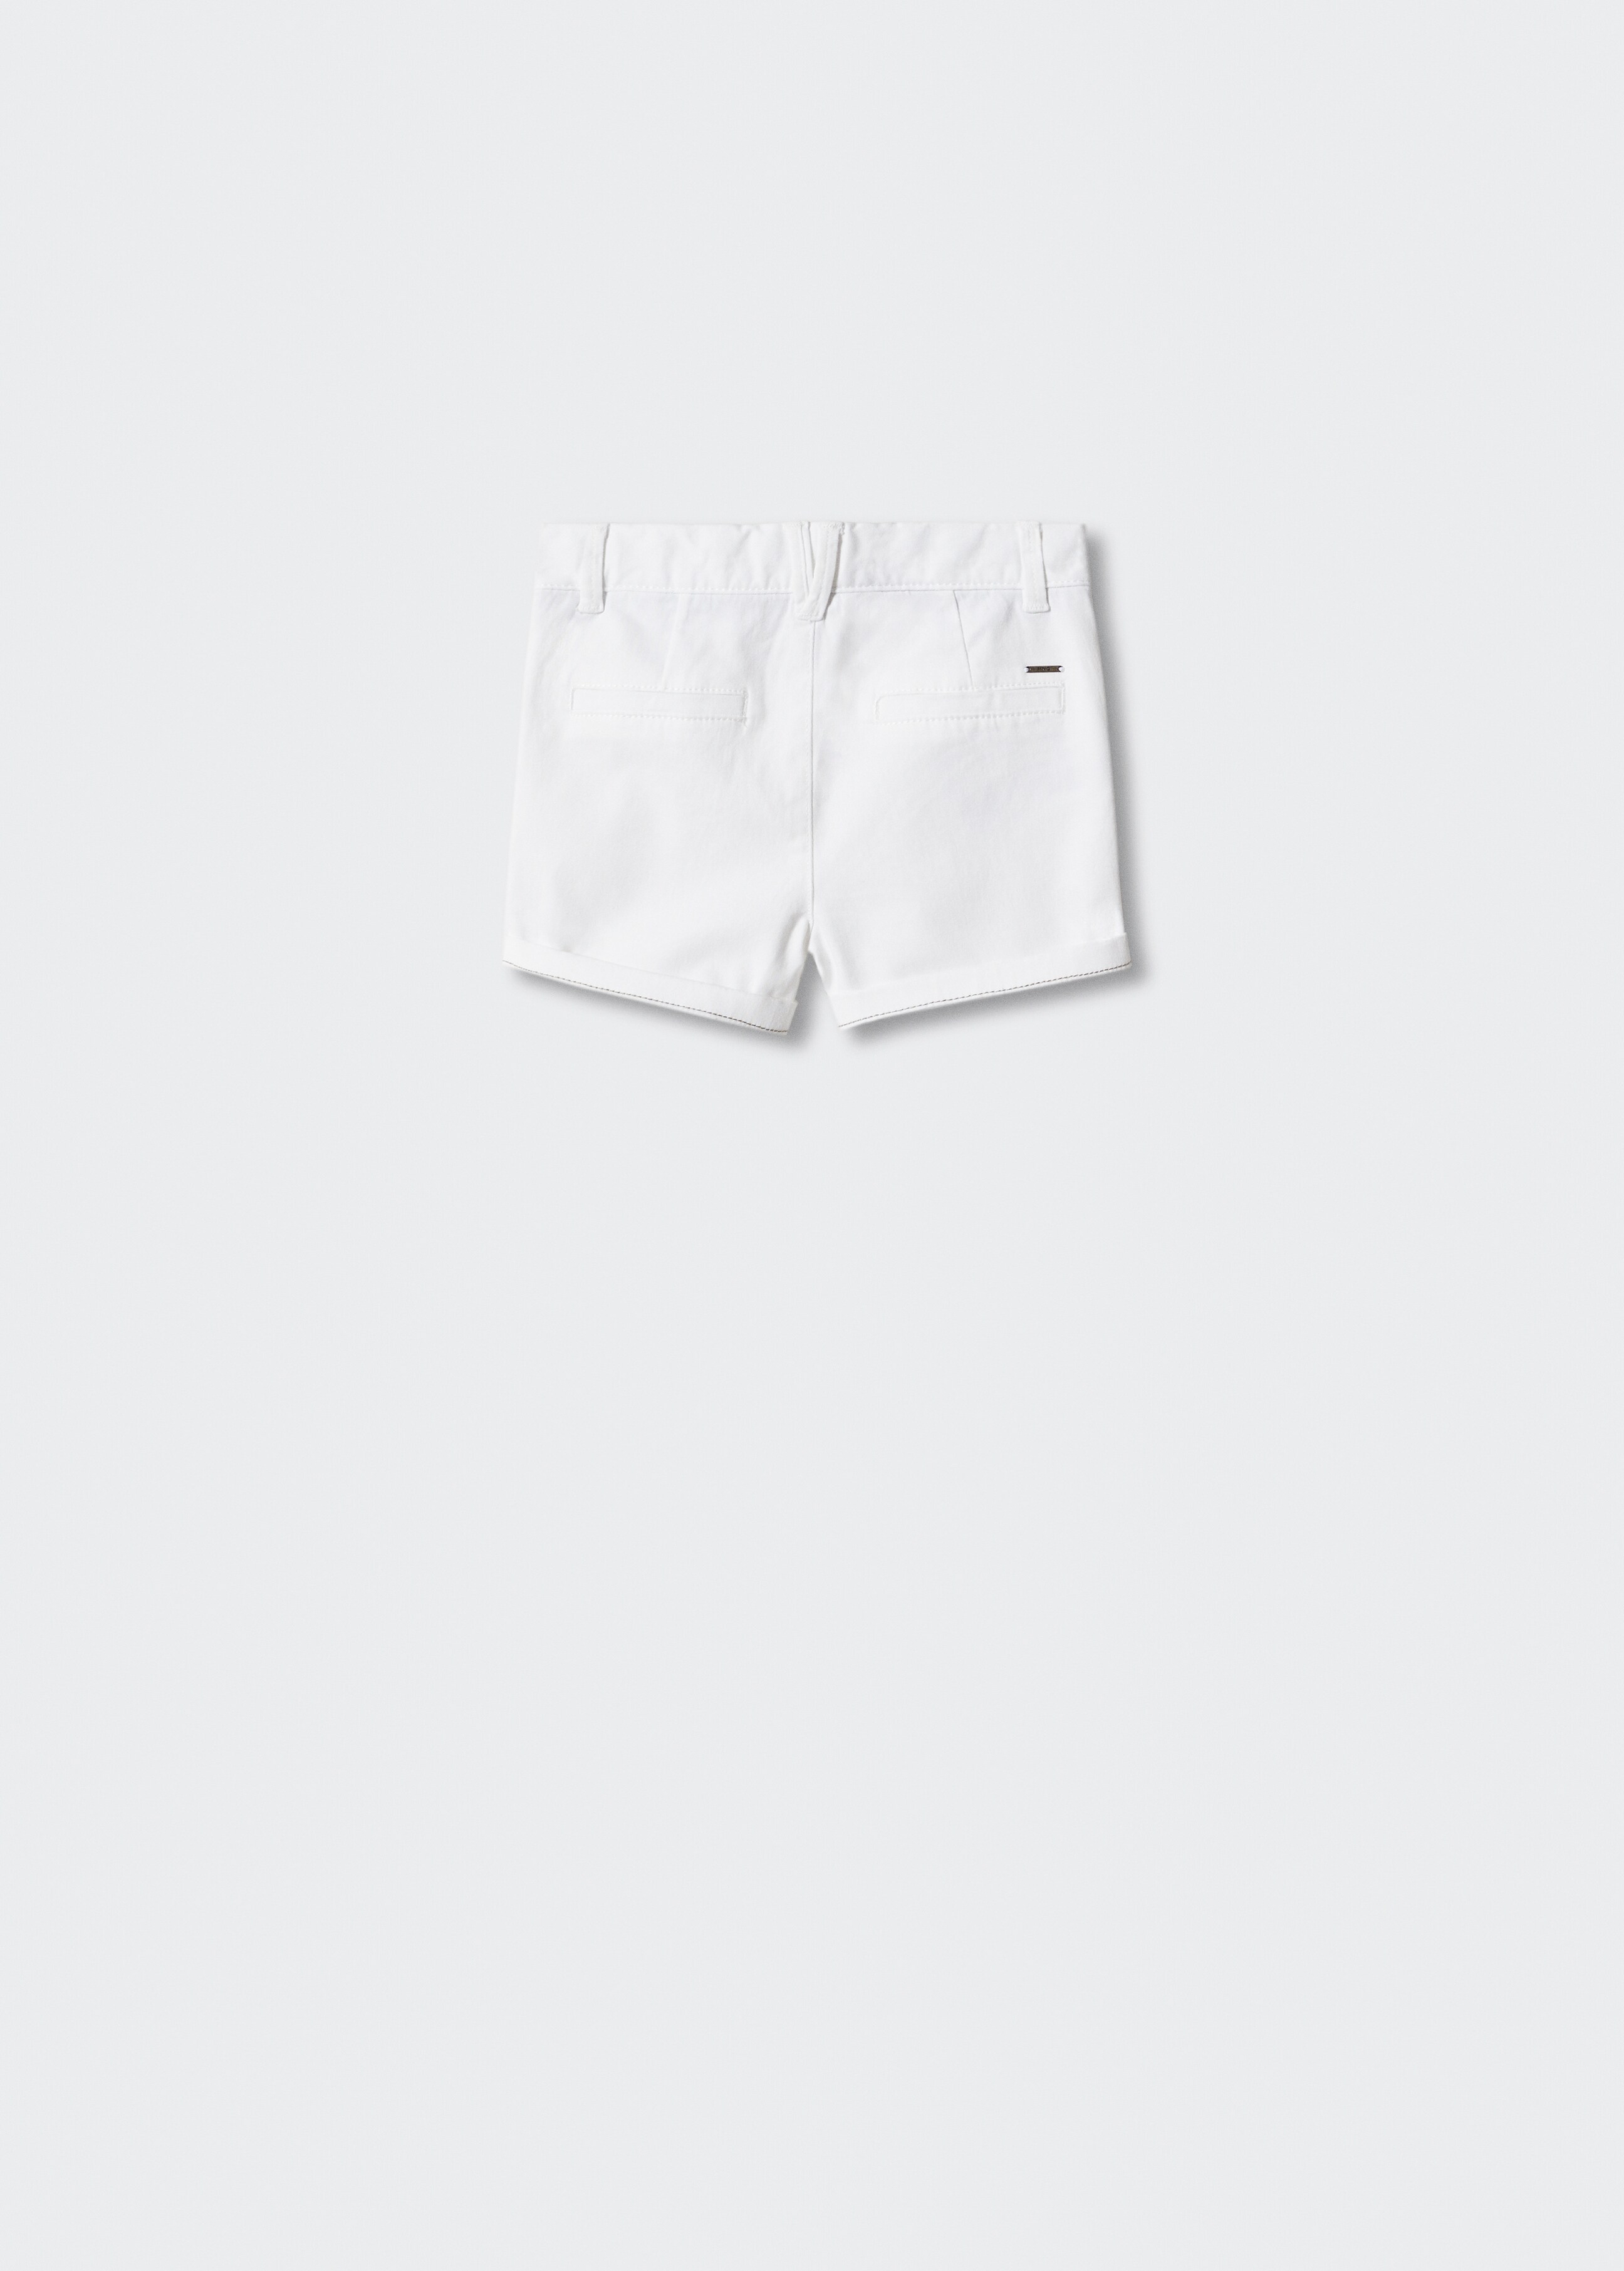 Cotton chino style Bermuda shorts - Reverse of the article